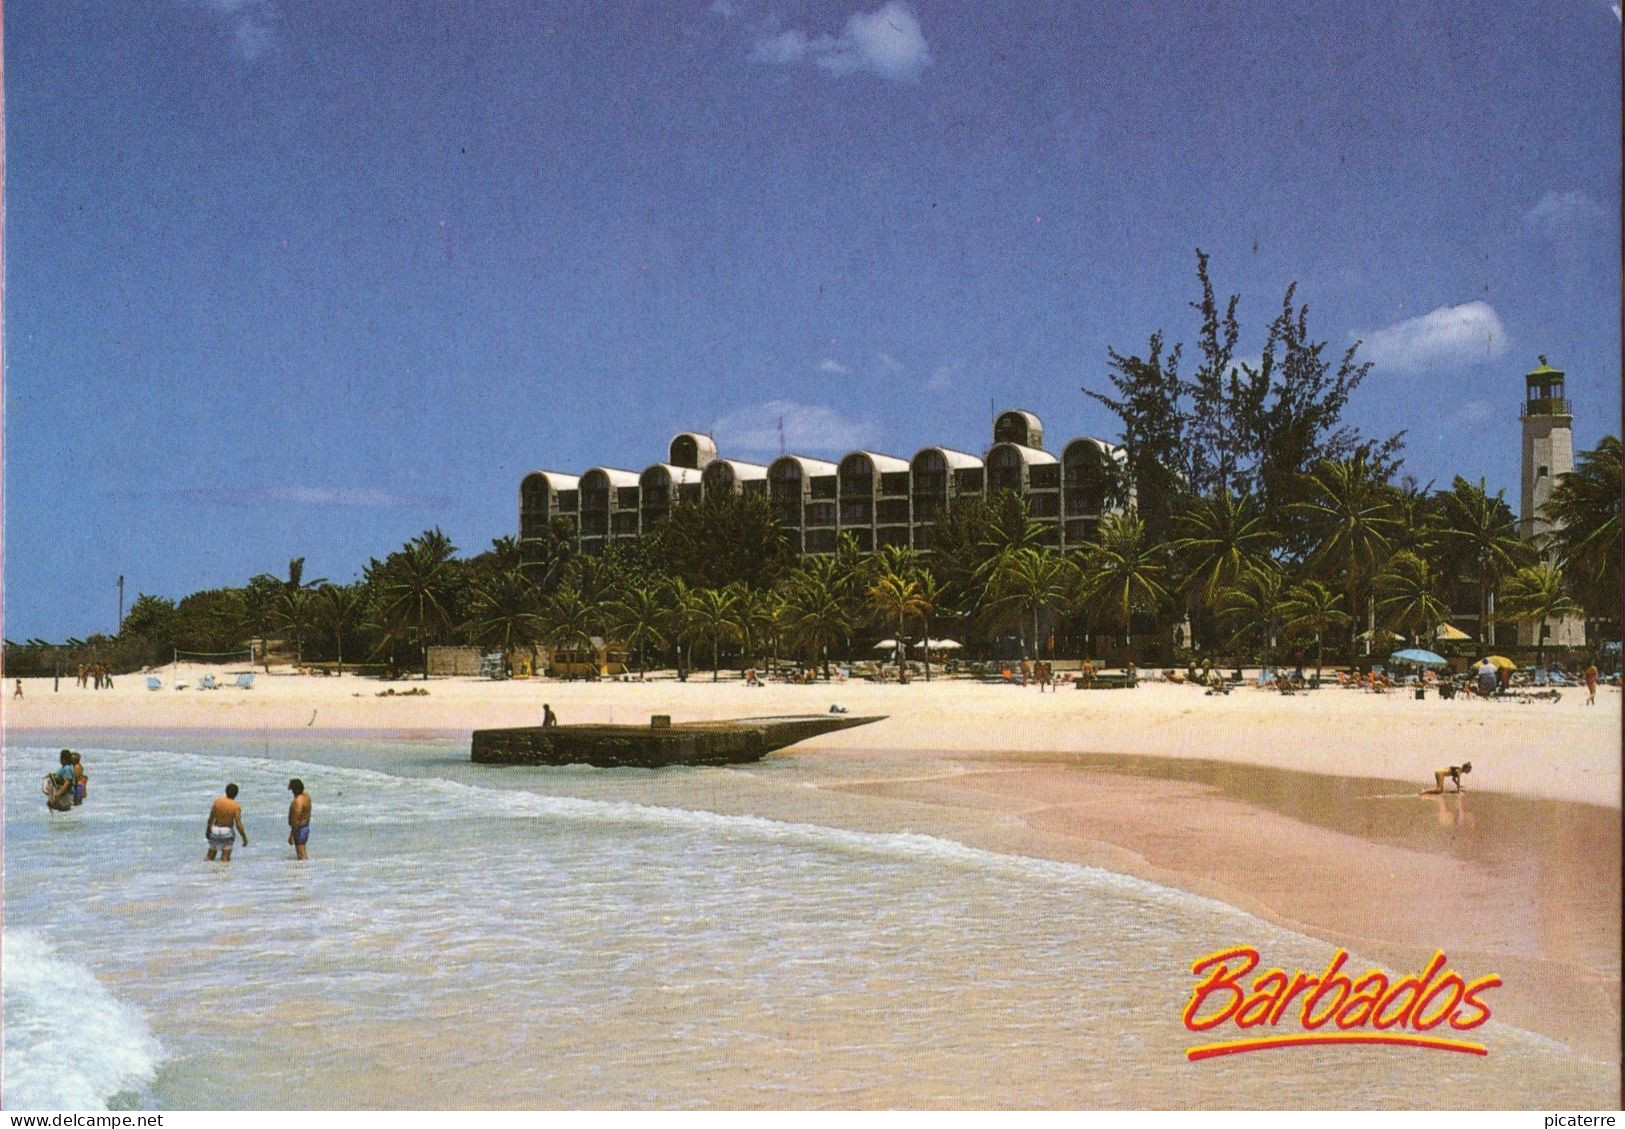 BARBADOS - Hilton Beach & Hotel Also Needham's Point Lighthouse,St.Michael- Ex Large Postcard 170mmx120mm - Barbades